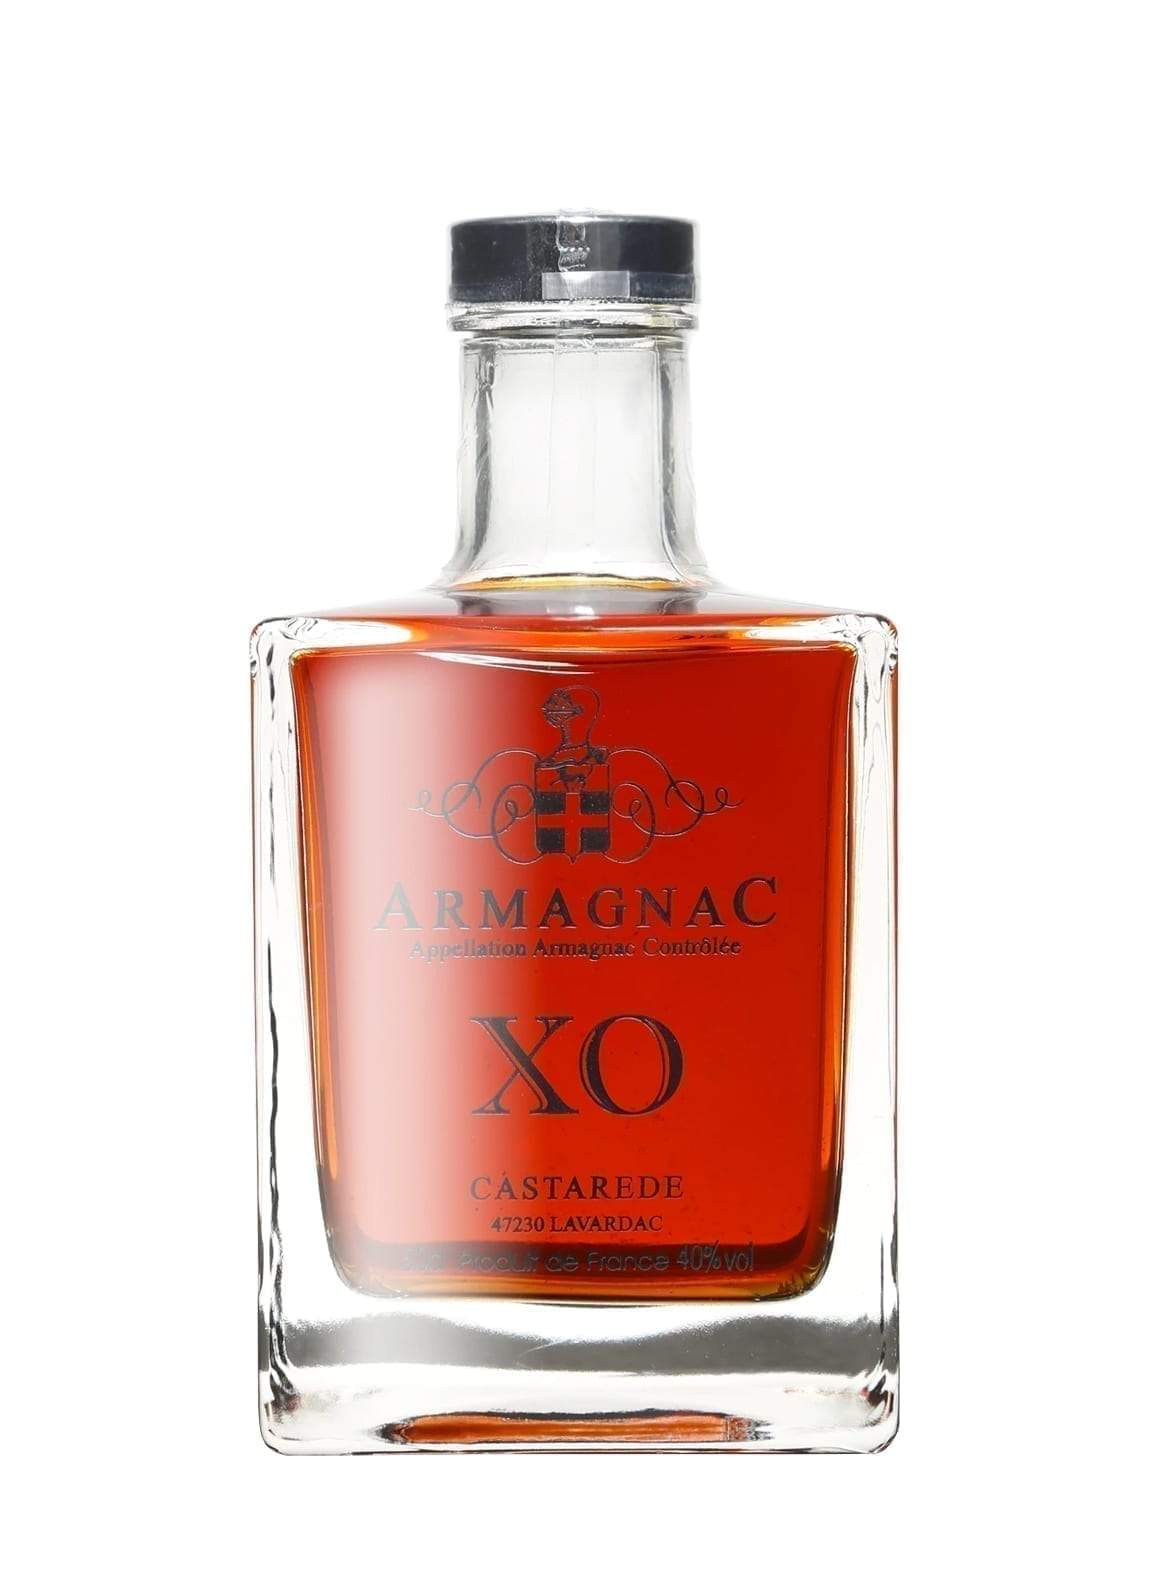 Castarede Armagnac XO 20 years Carafe 40% 500ml | Brandy | Shop online at Spirits of France